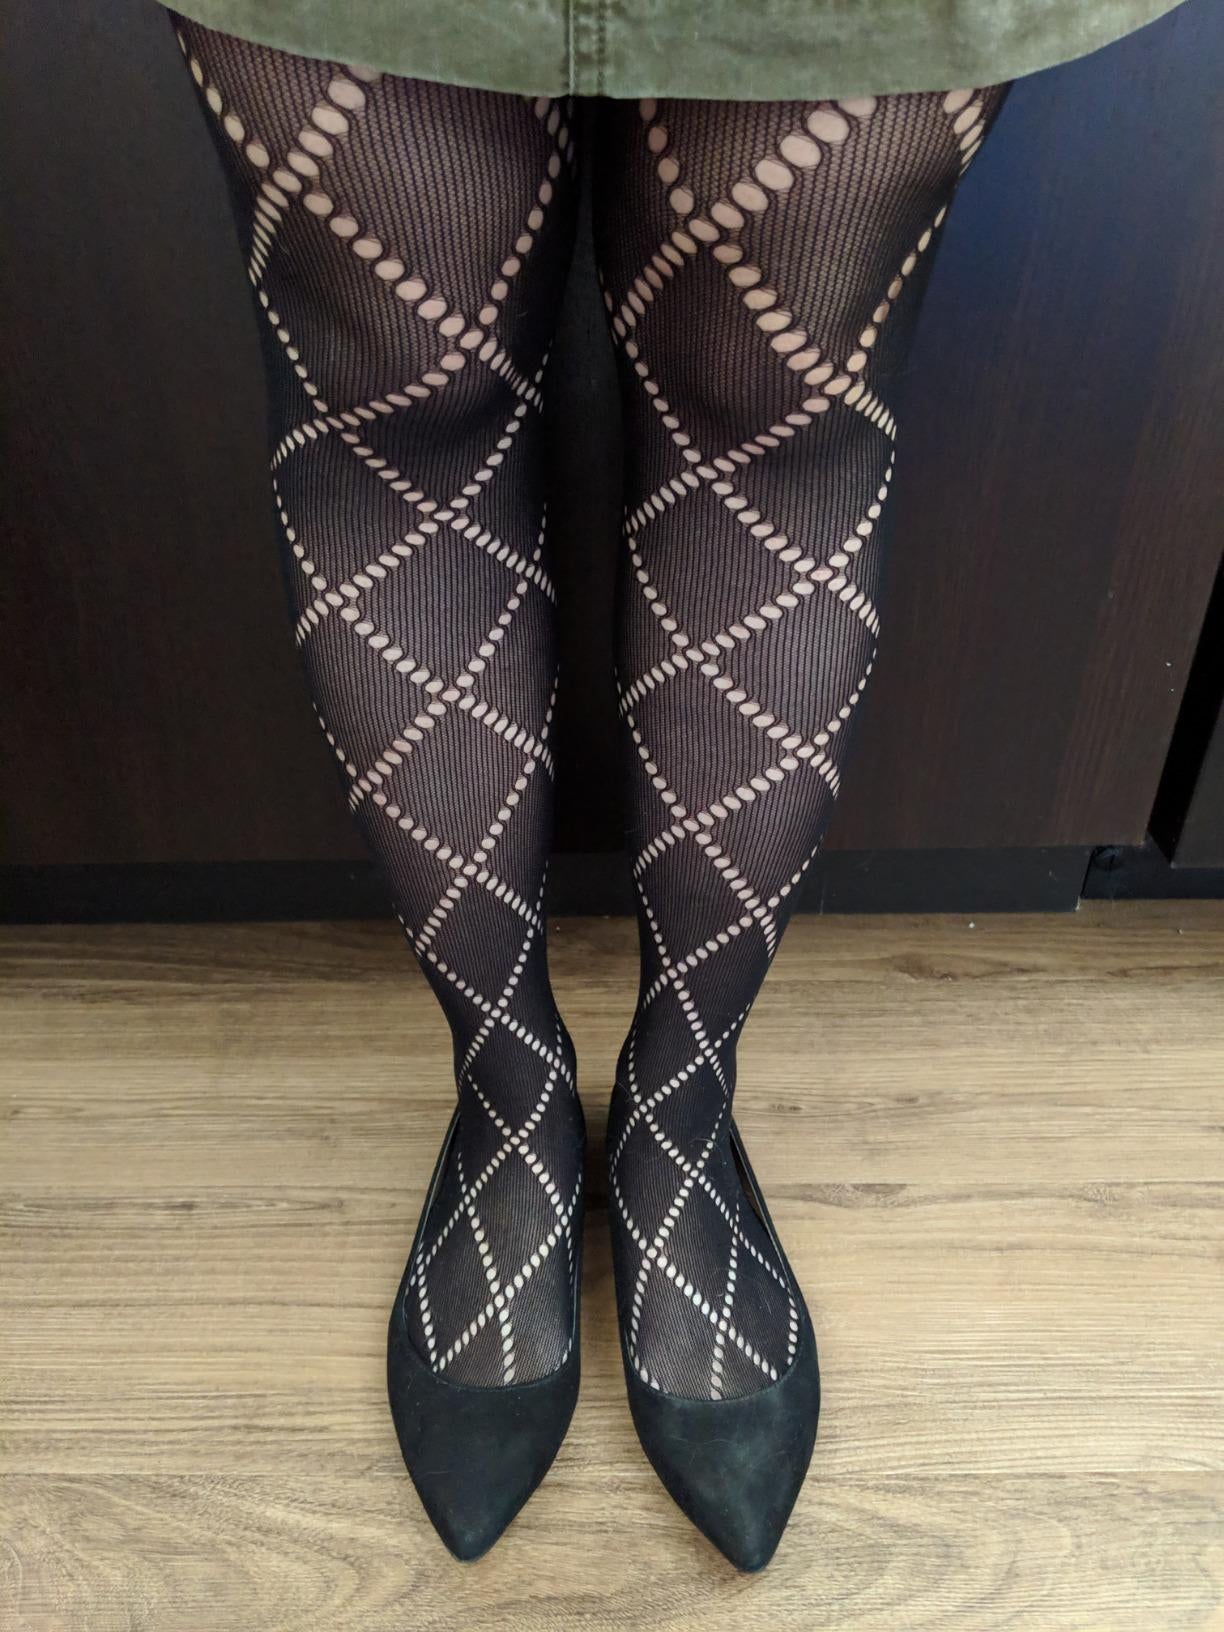 Patterned Tights: Wide Selection Of Fashion Tights